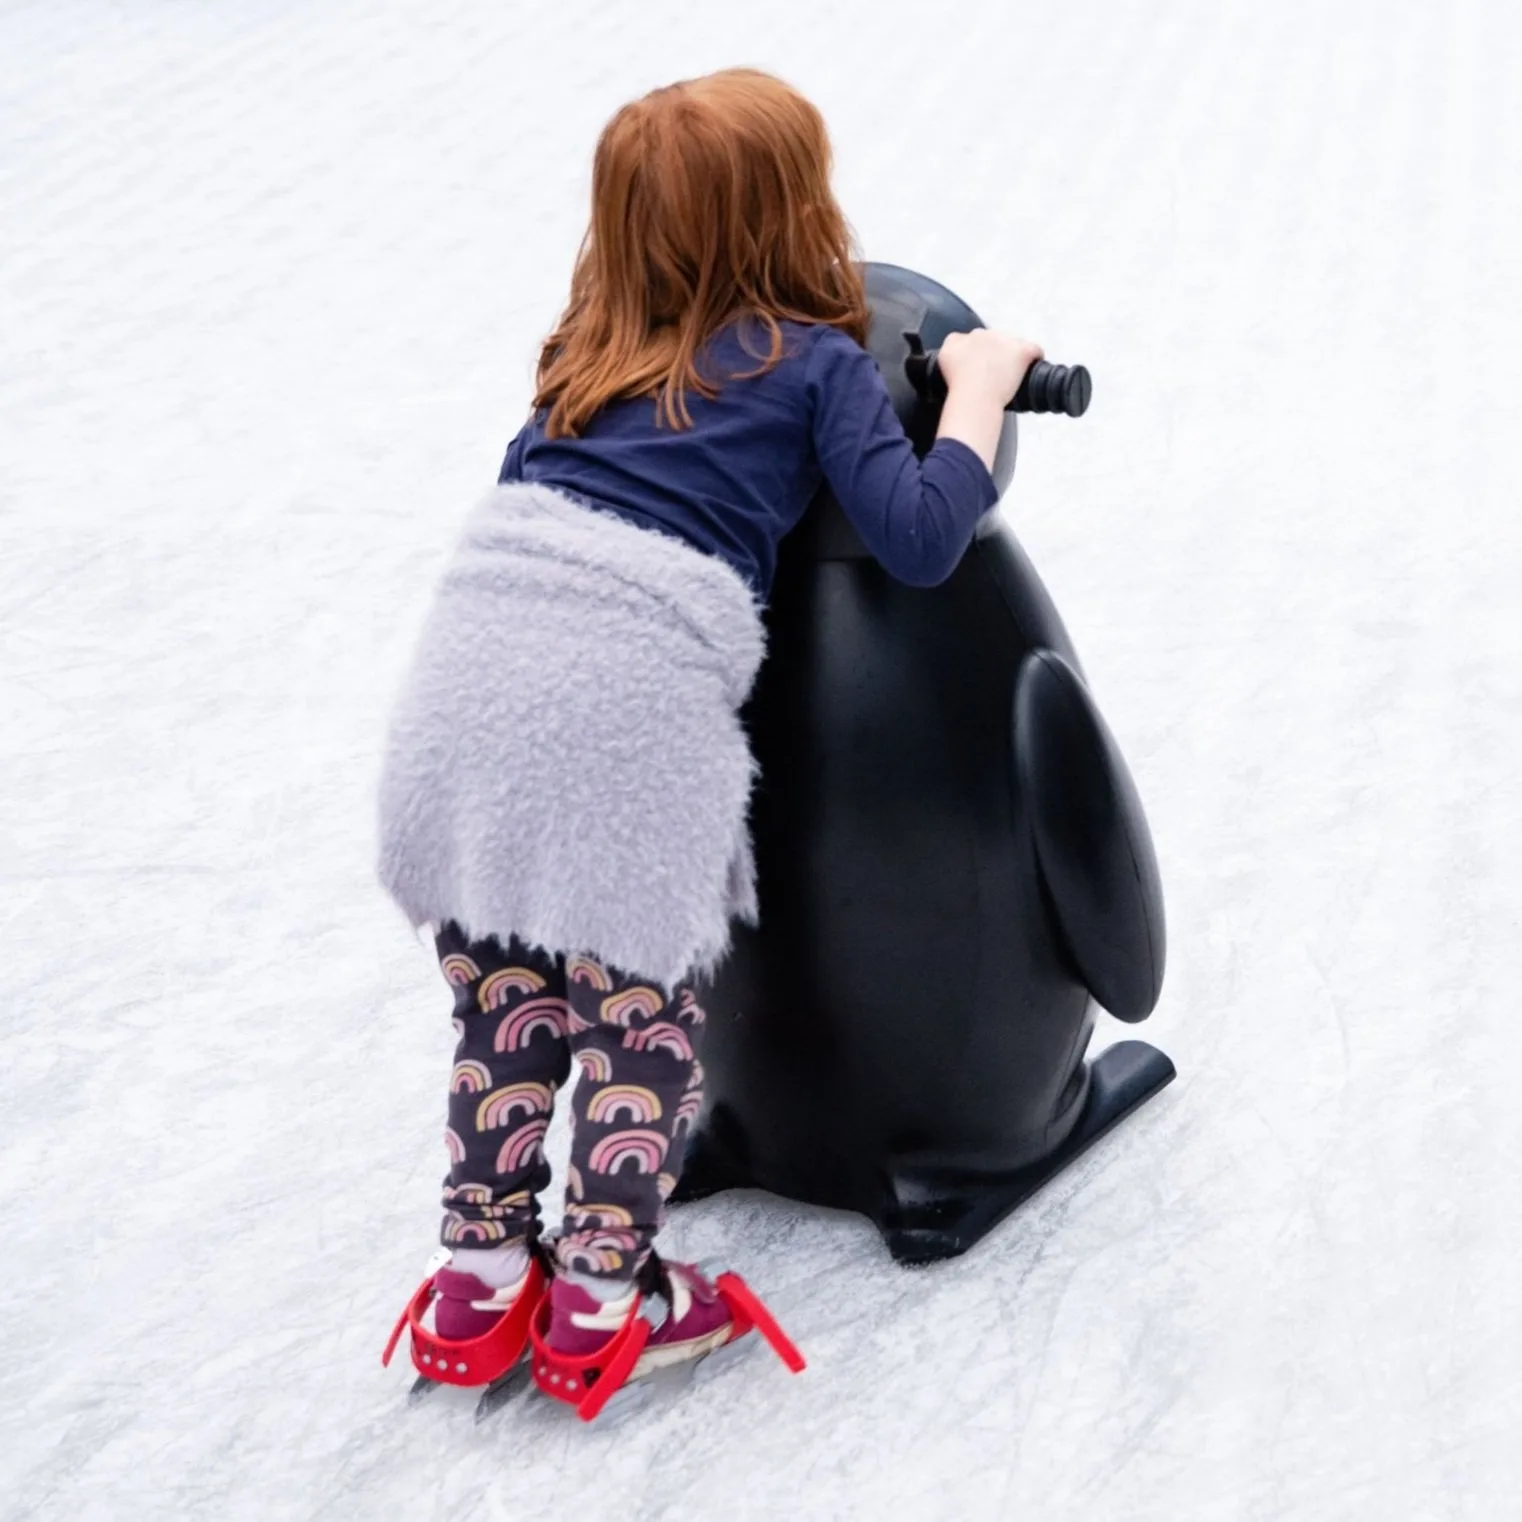 Ice Rink Canary Wharf Ticket Prices - Children